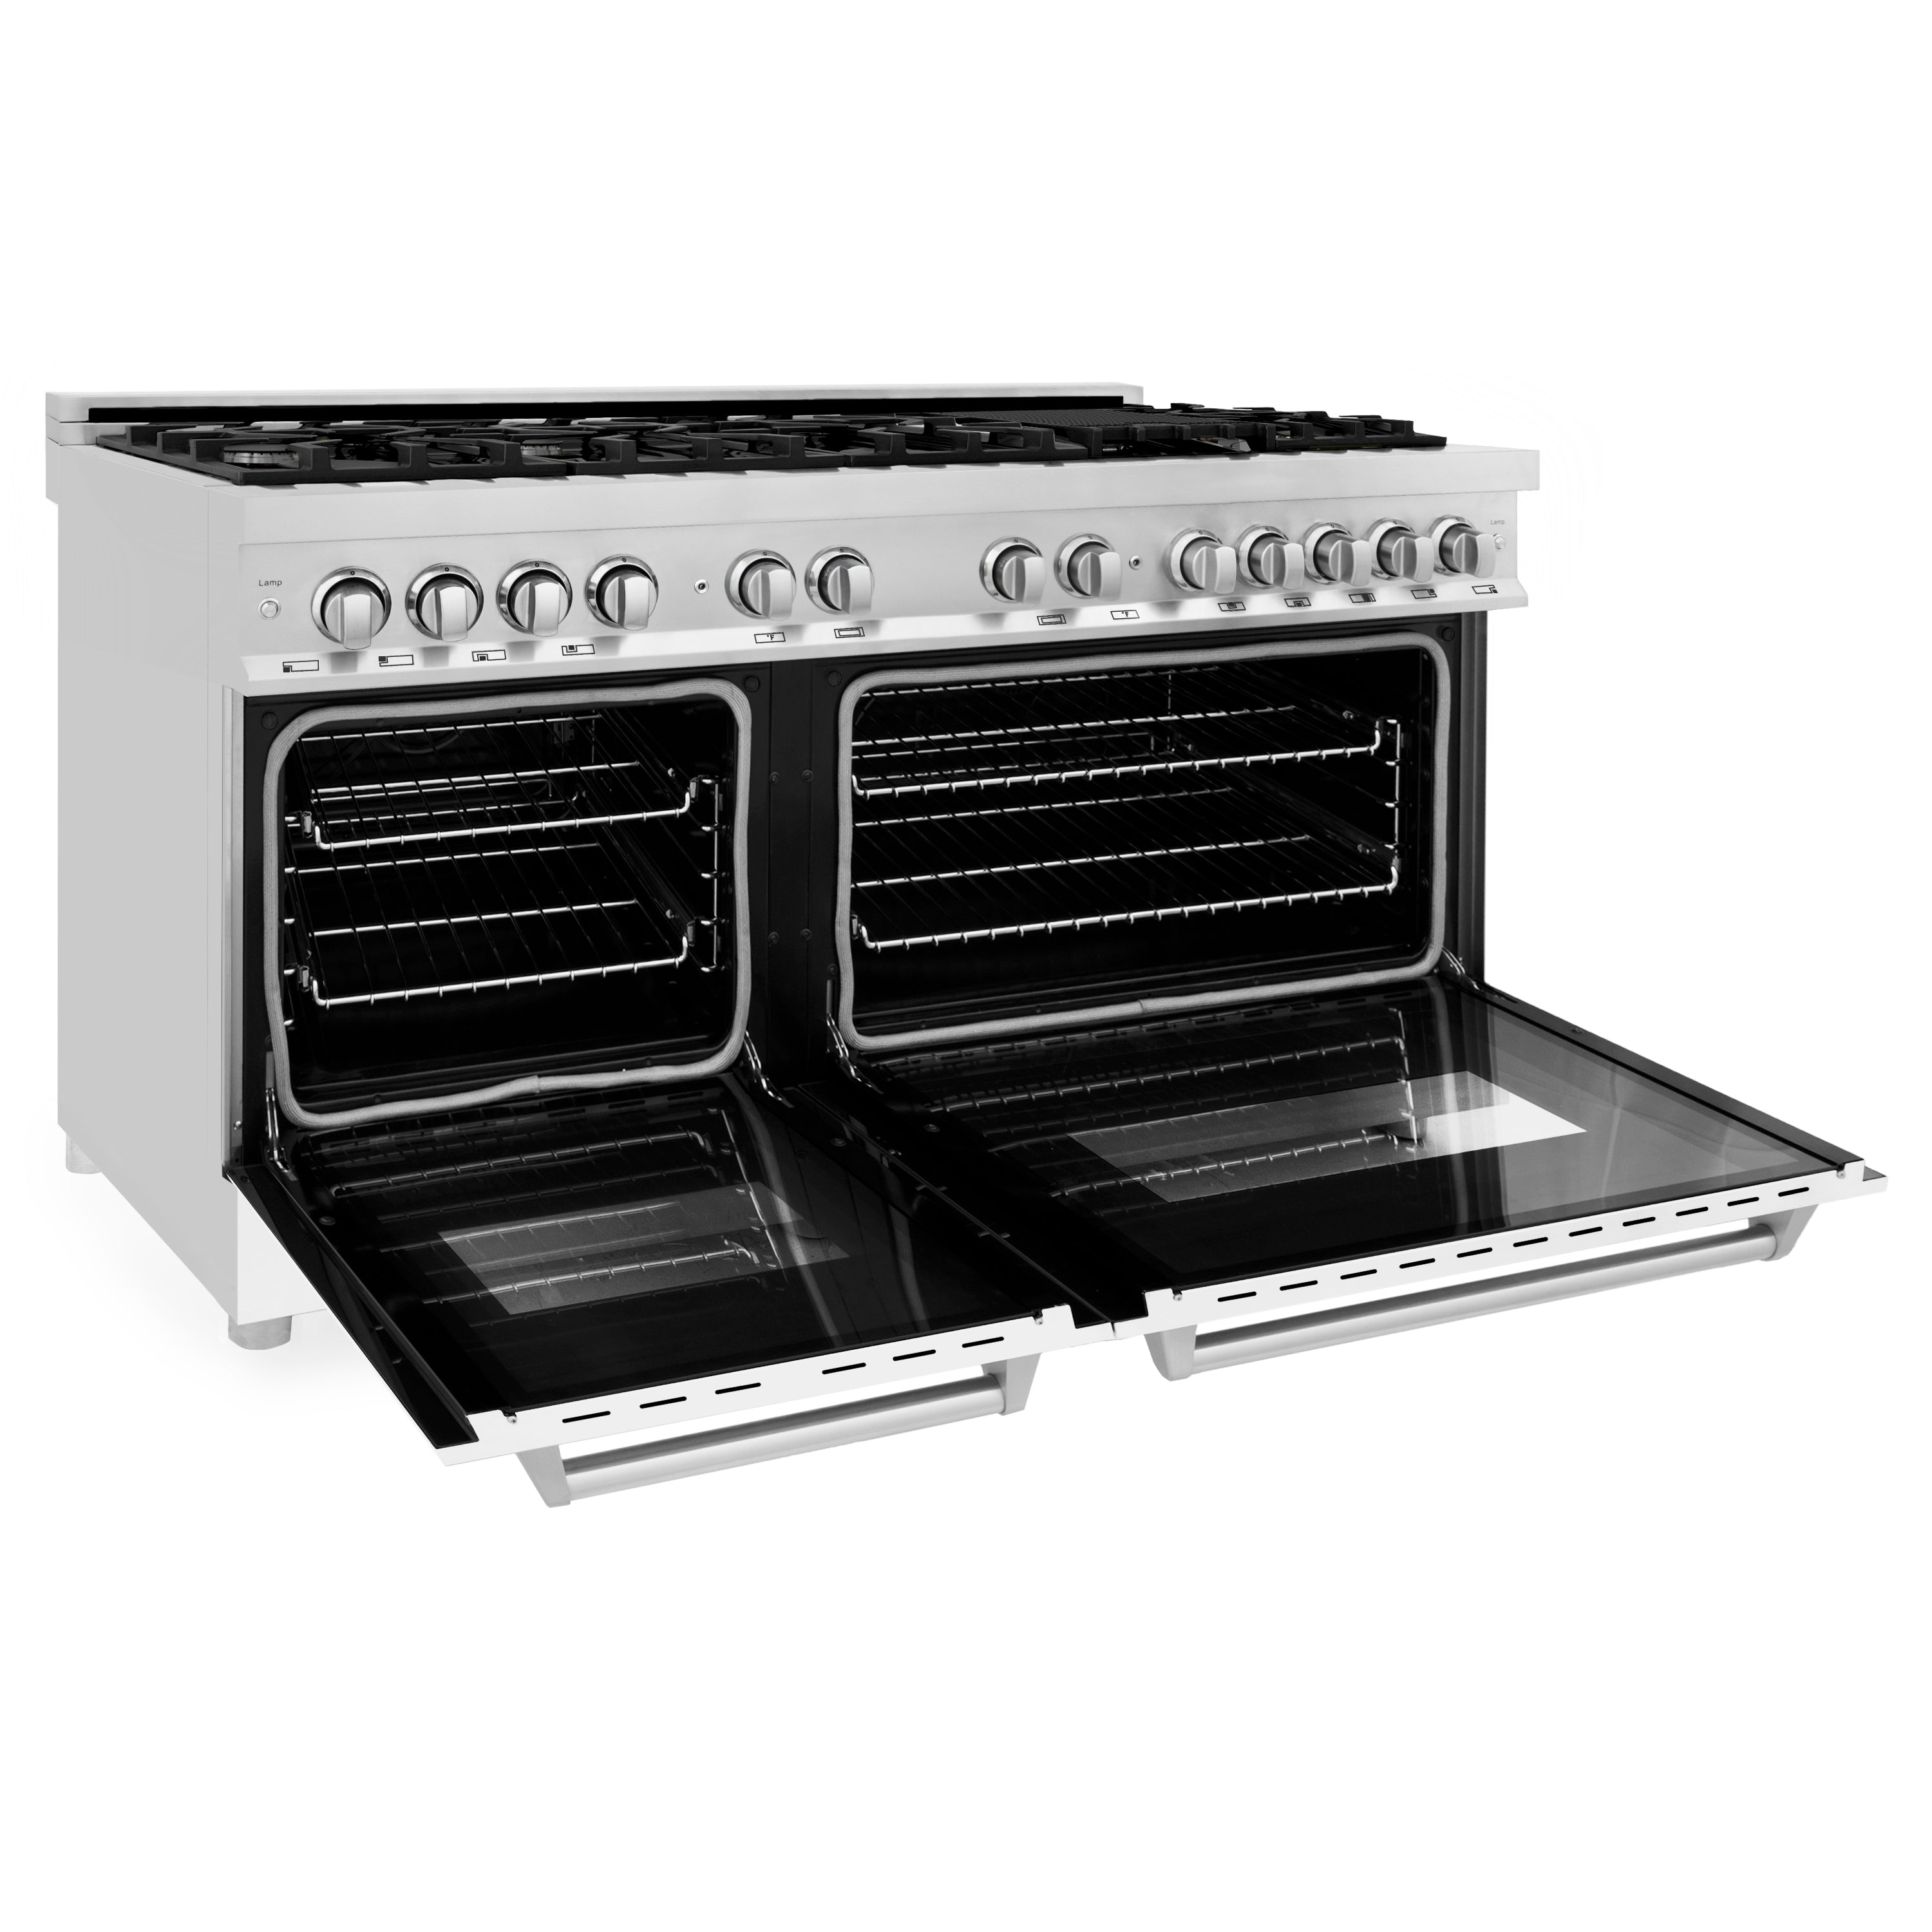 ZLINE 60" 7.4 cu. ft. Dual Fuel Range with Gas Stove and Electric Oven in Stainless Steel and White Matte Door (RA-WM-60)